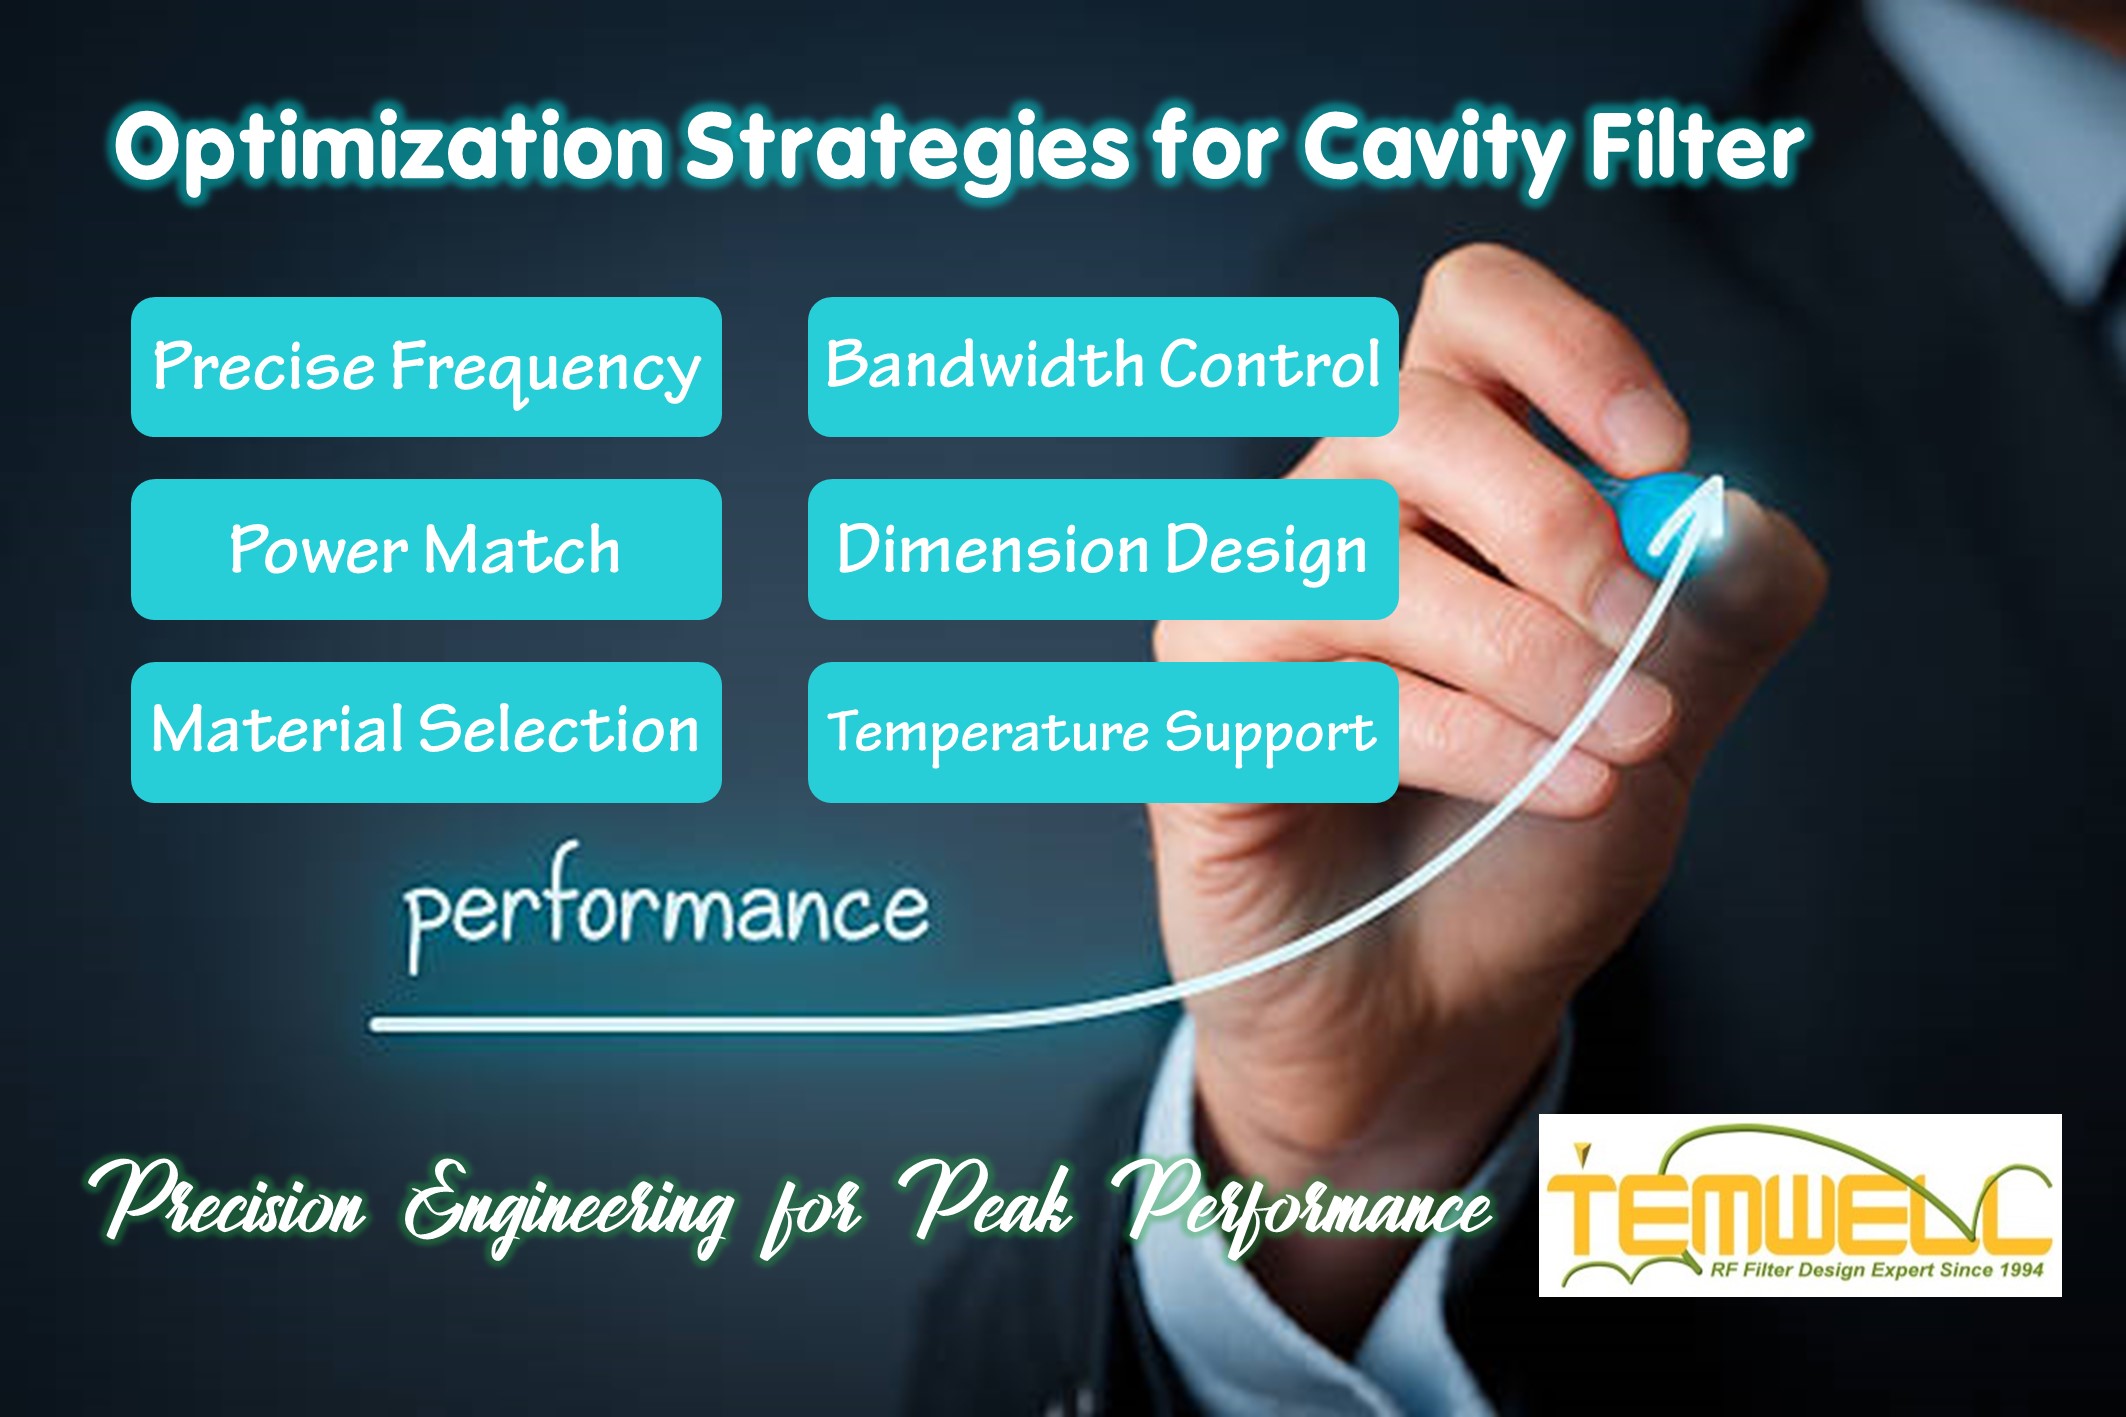 Temwell's cavity filter optimization strategies are incluing precise frequecy, bandwidth control, power match, dimension design, material selection, temperature support